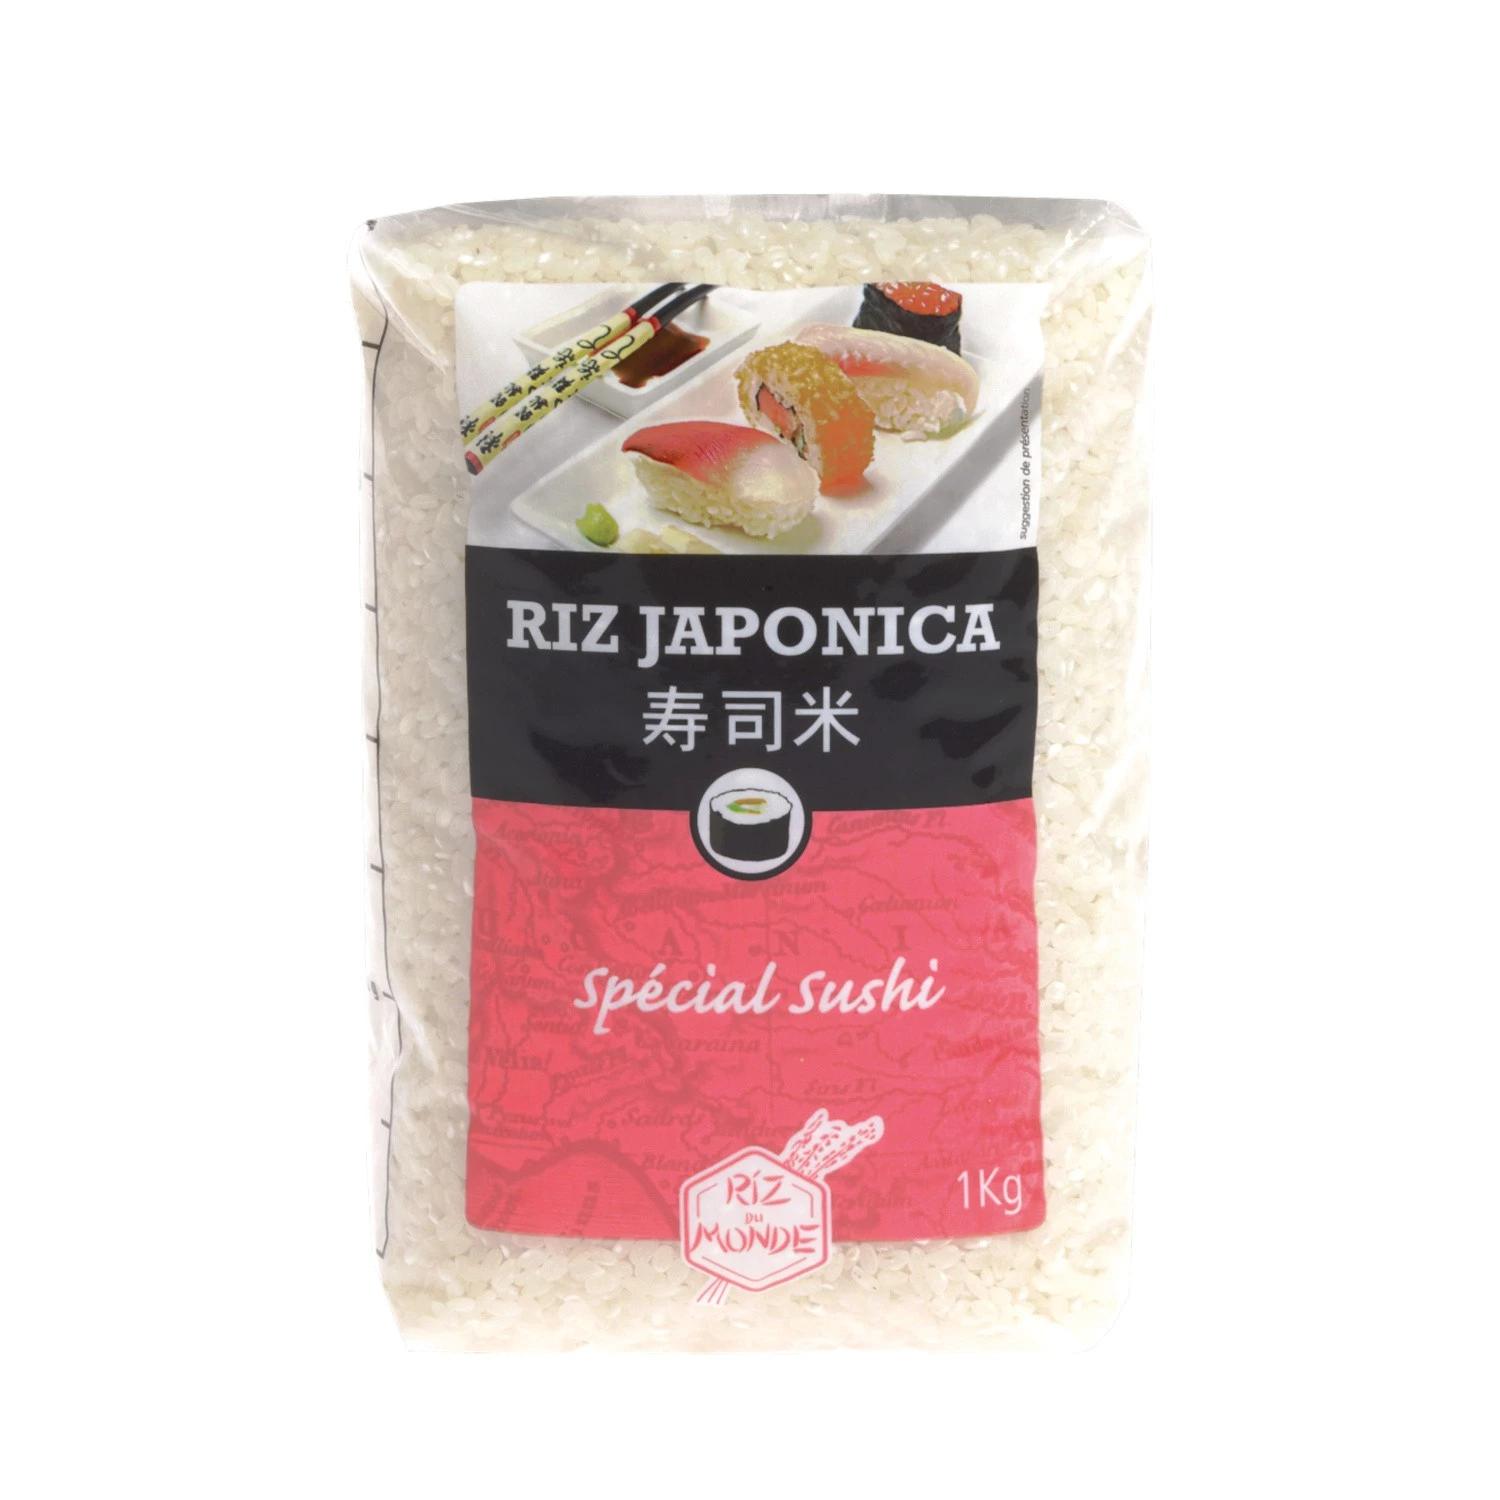 Special sushi rice Japonica 1kg - RICE OF THE WORLD